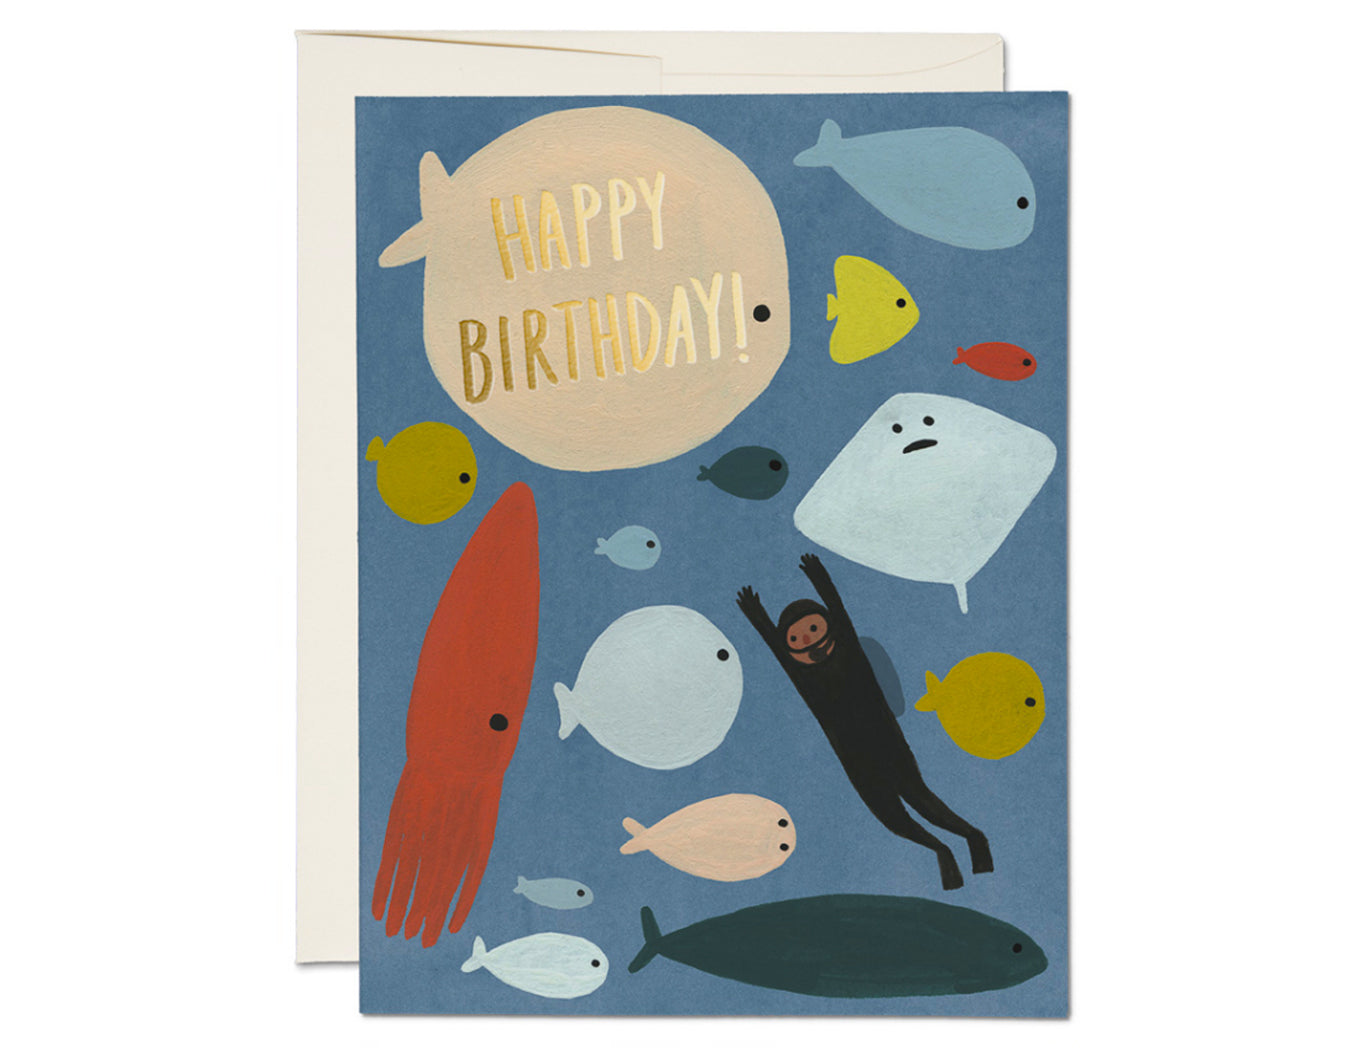 blue background card with illustrated ocean creatures and a scuba diver on it. says happy birthday in gold foil on a fish.